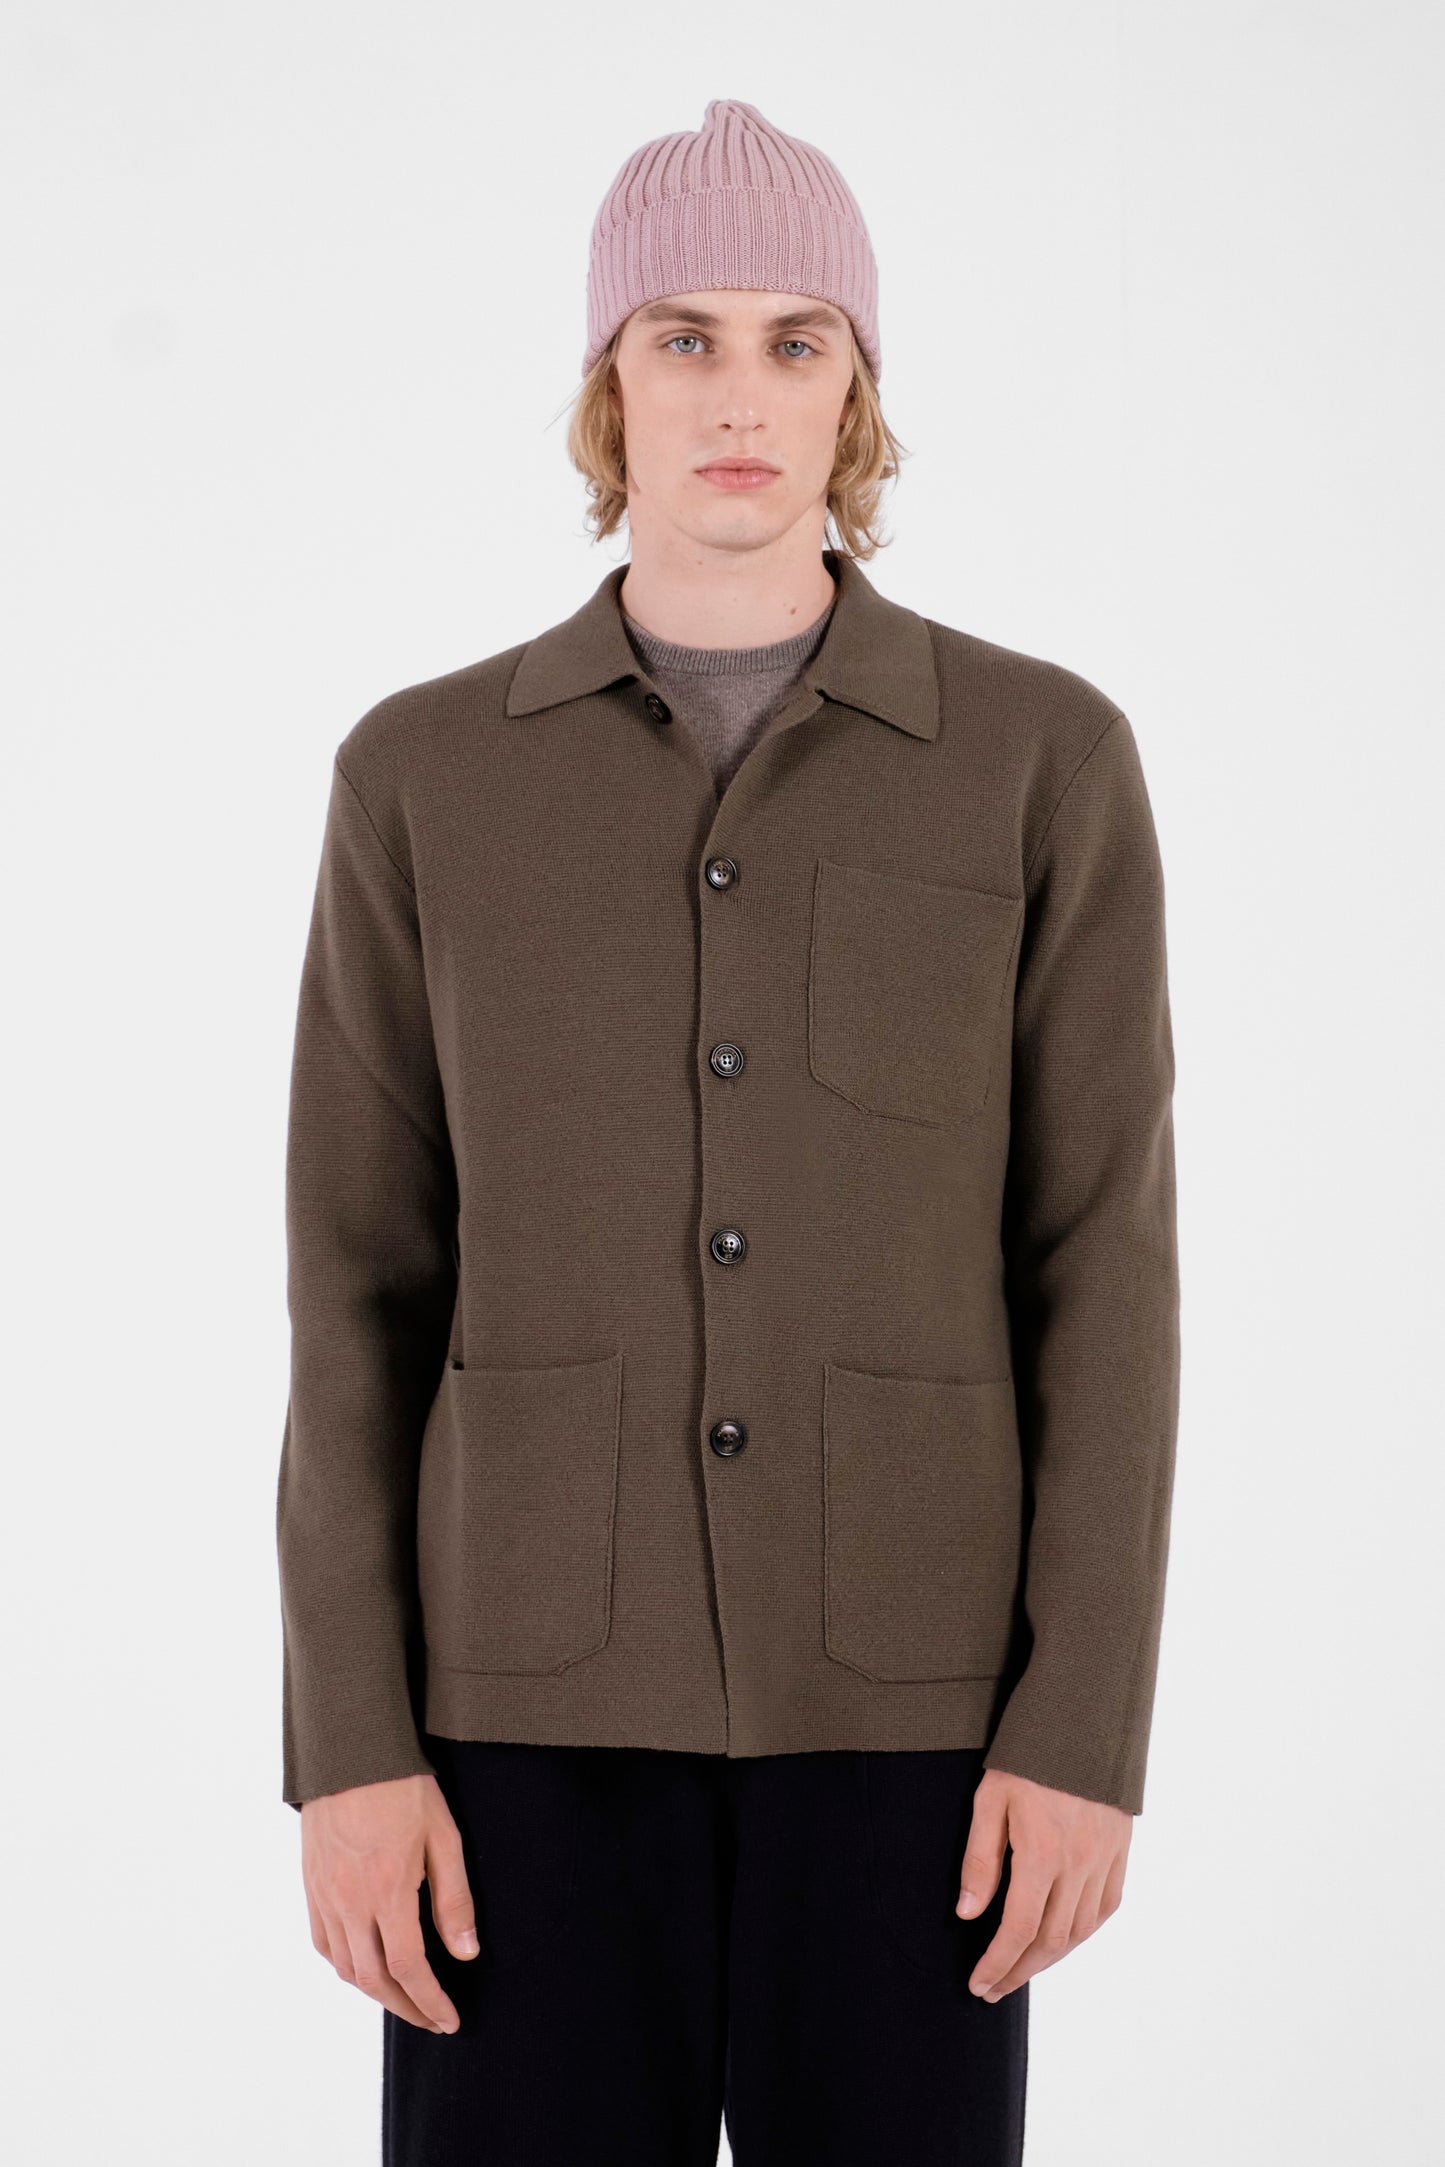 Shirt with olive green pocket